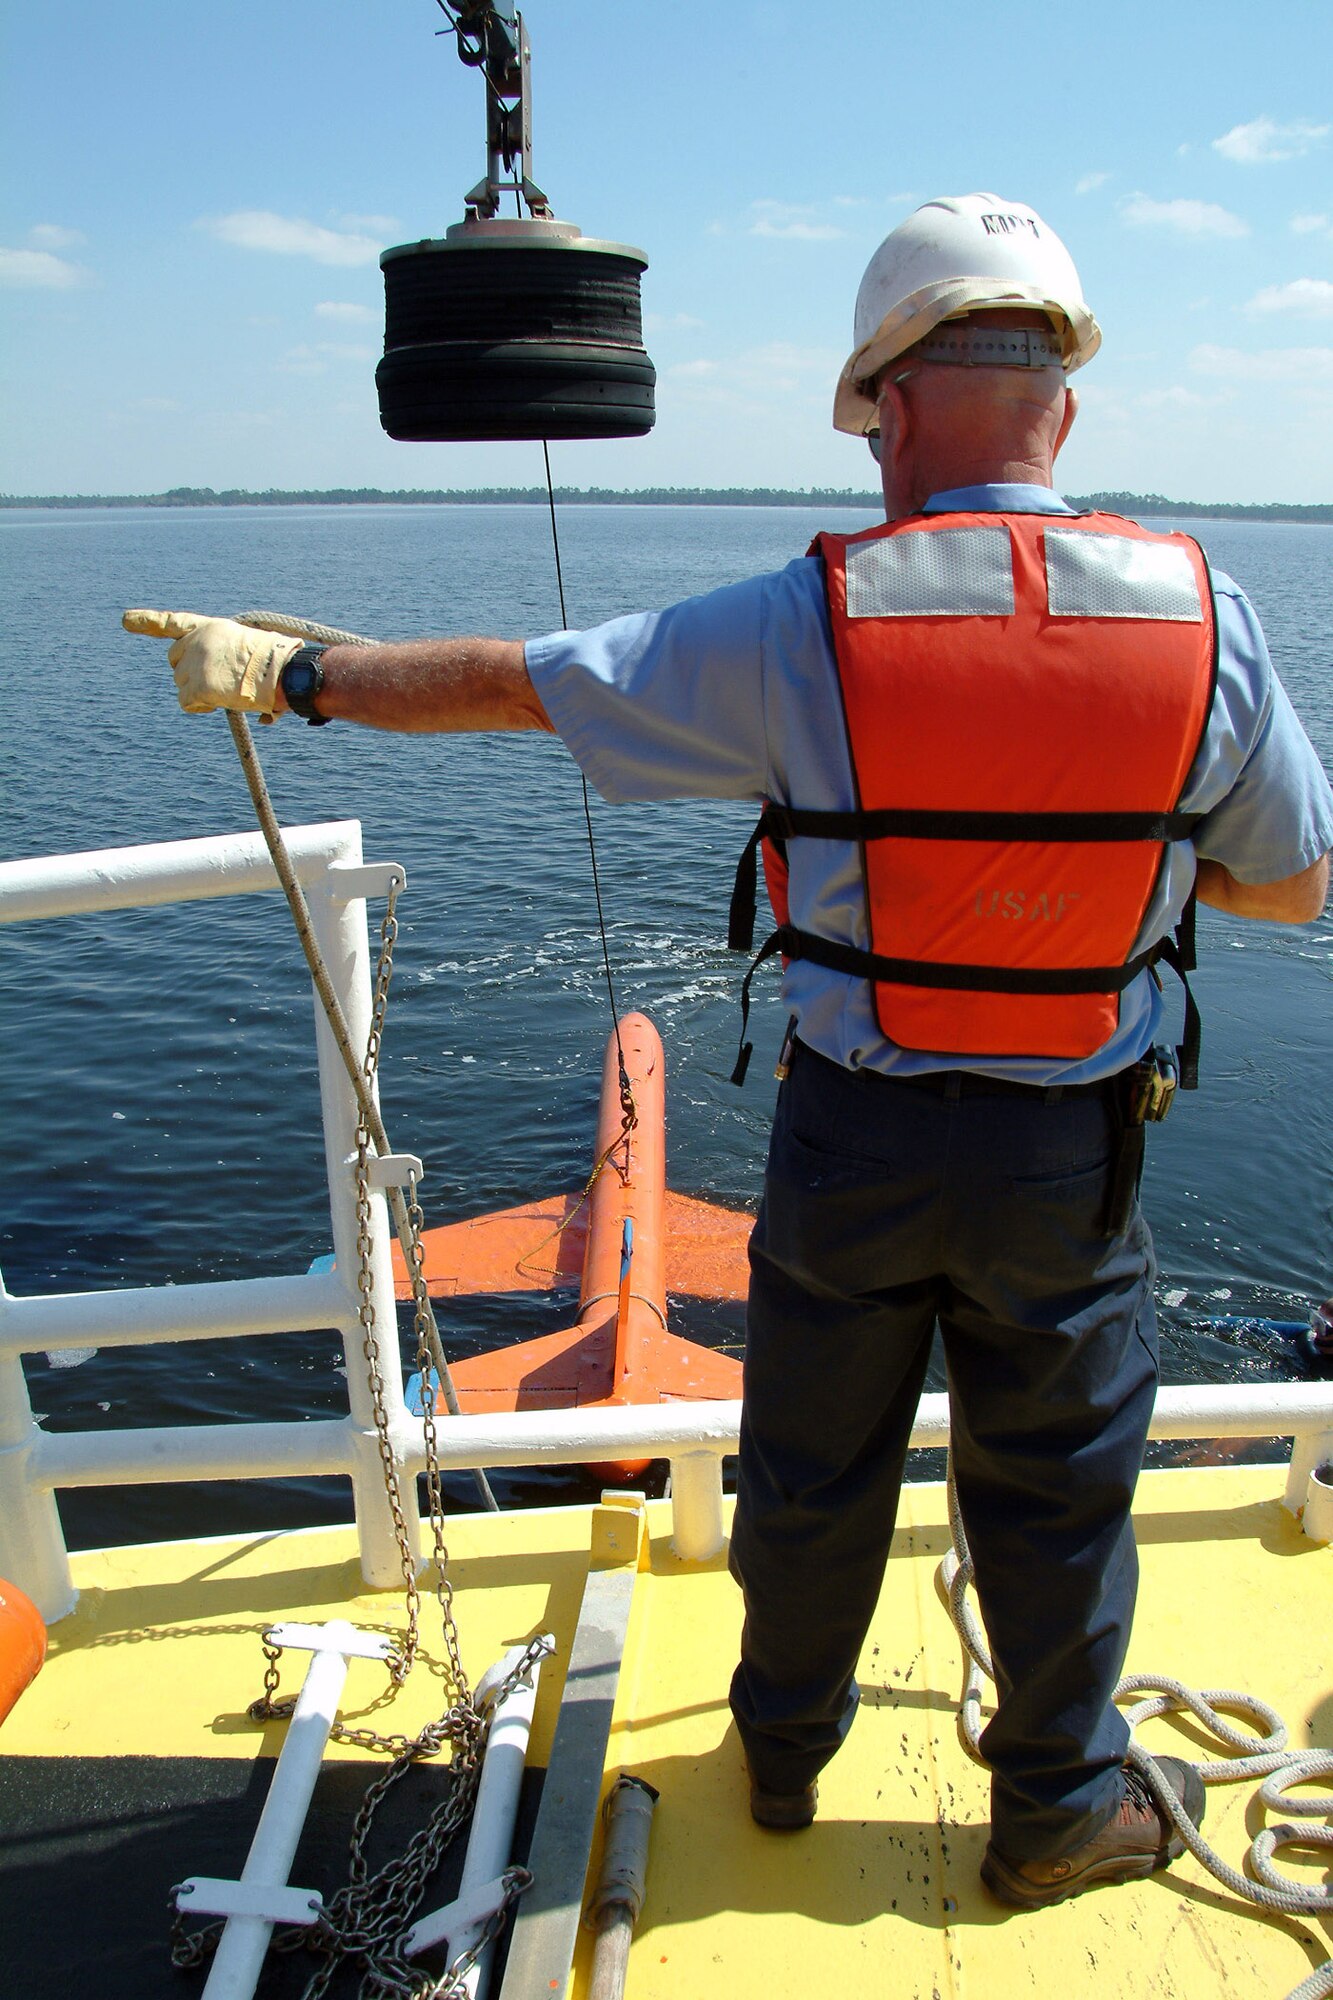 Byron Howle directs the crane movements to pick up the model BQM-107 sub-scale drone during a recovery demonstration March 26 in the waters off of Tyndall Air Force Base, Fla. The ship, one of three 120-foot boats owned by the Air Force, is contracted through the 82nd Aerial Targets Squadron to help recover sub-scale drones after they are shot down during live fire exercises. (U.S. Air Force photo/Staff Sgt. Samuel King Jr.) 